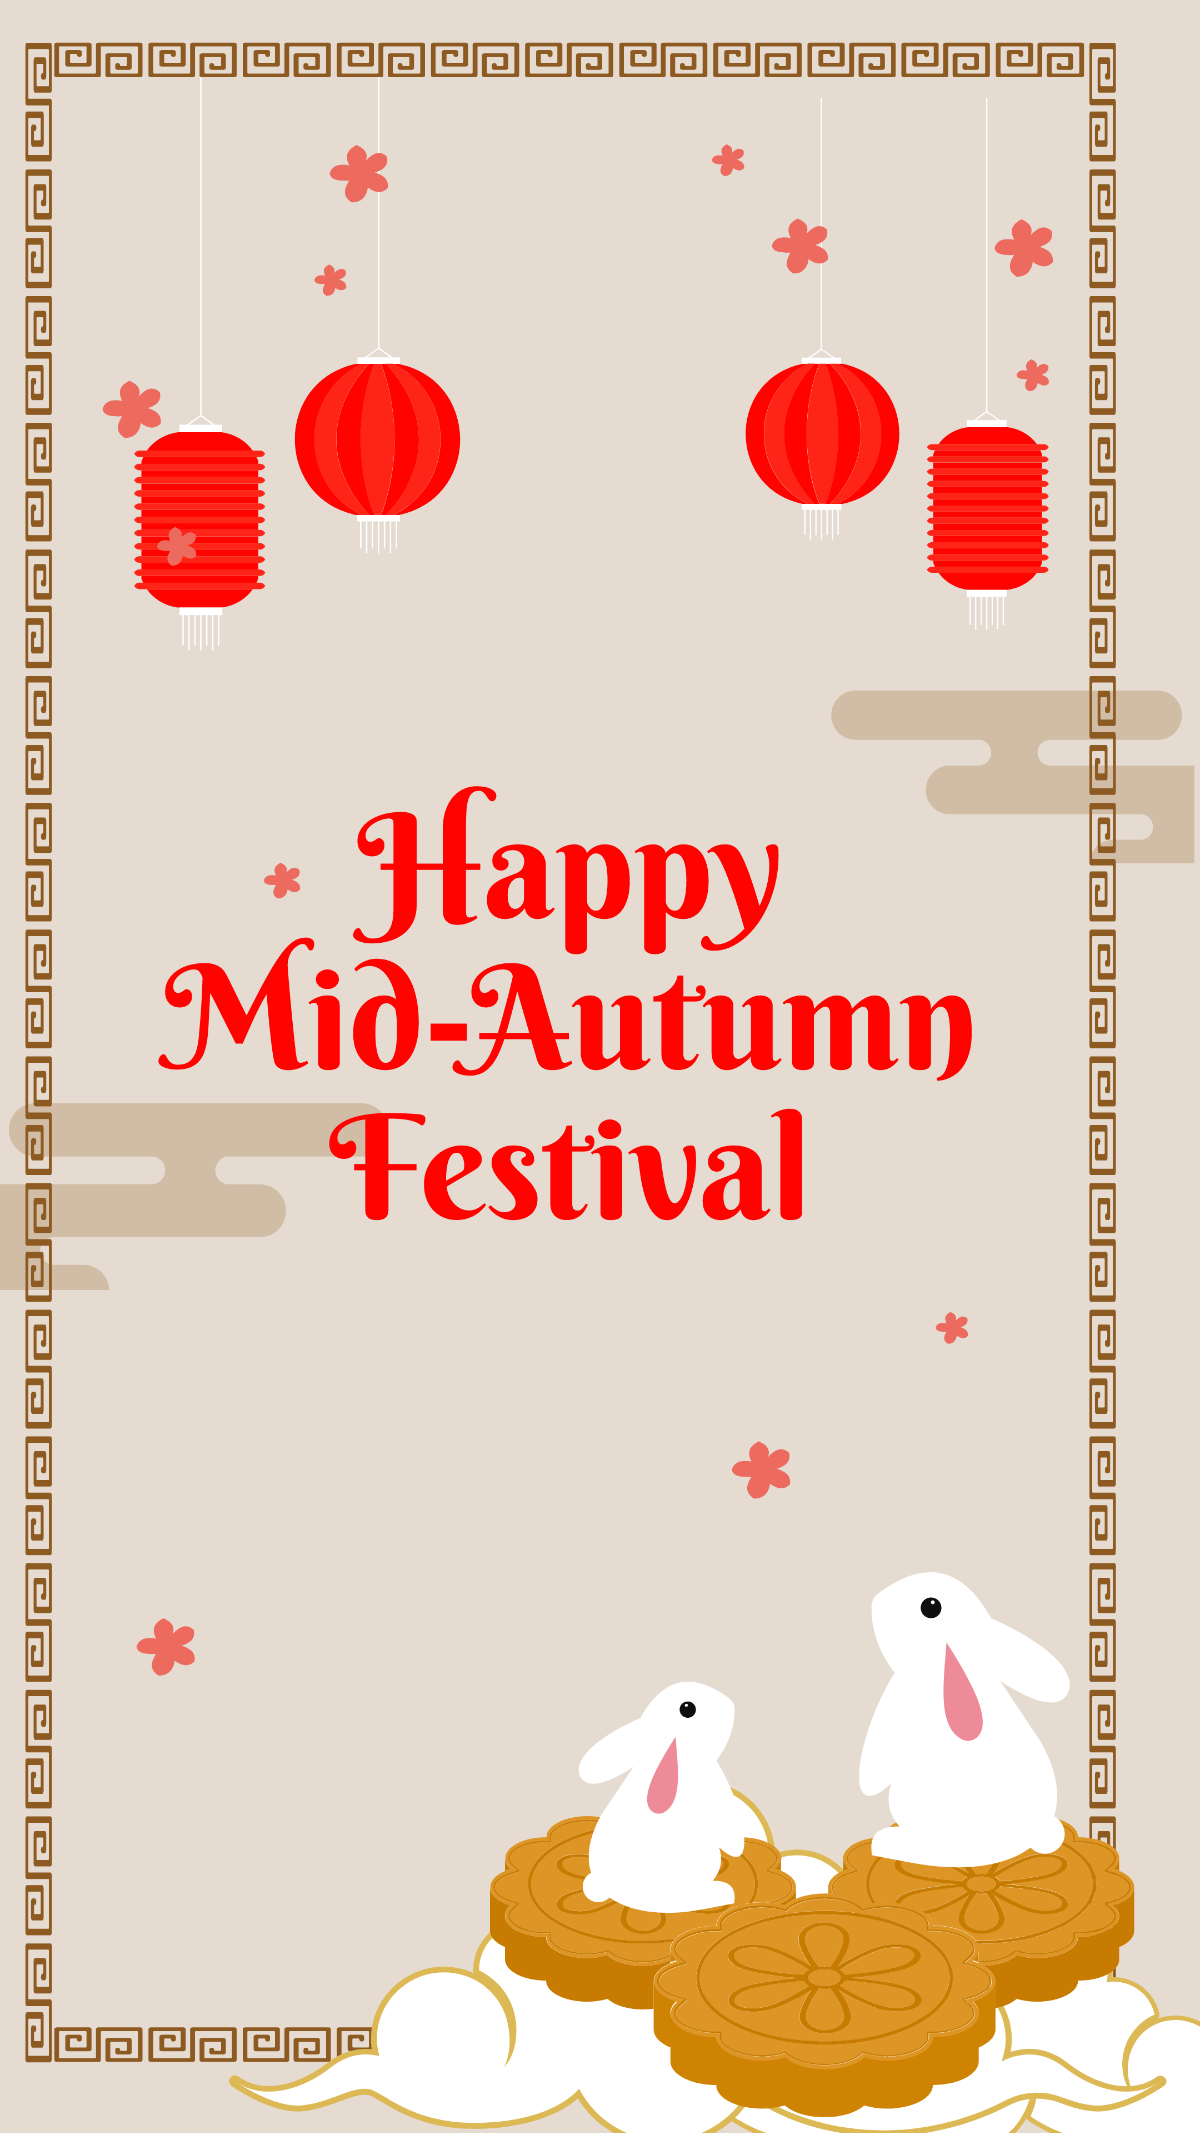 Mid-Autumn Festival iPhone background Template